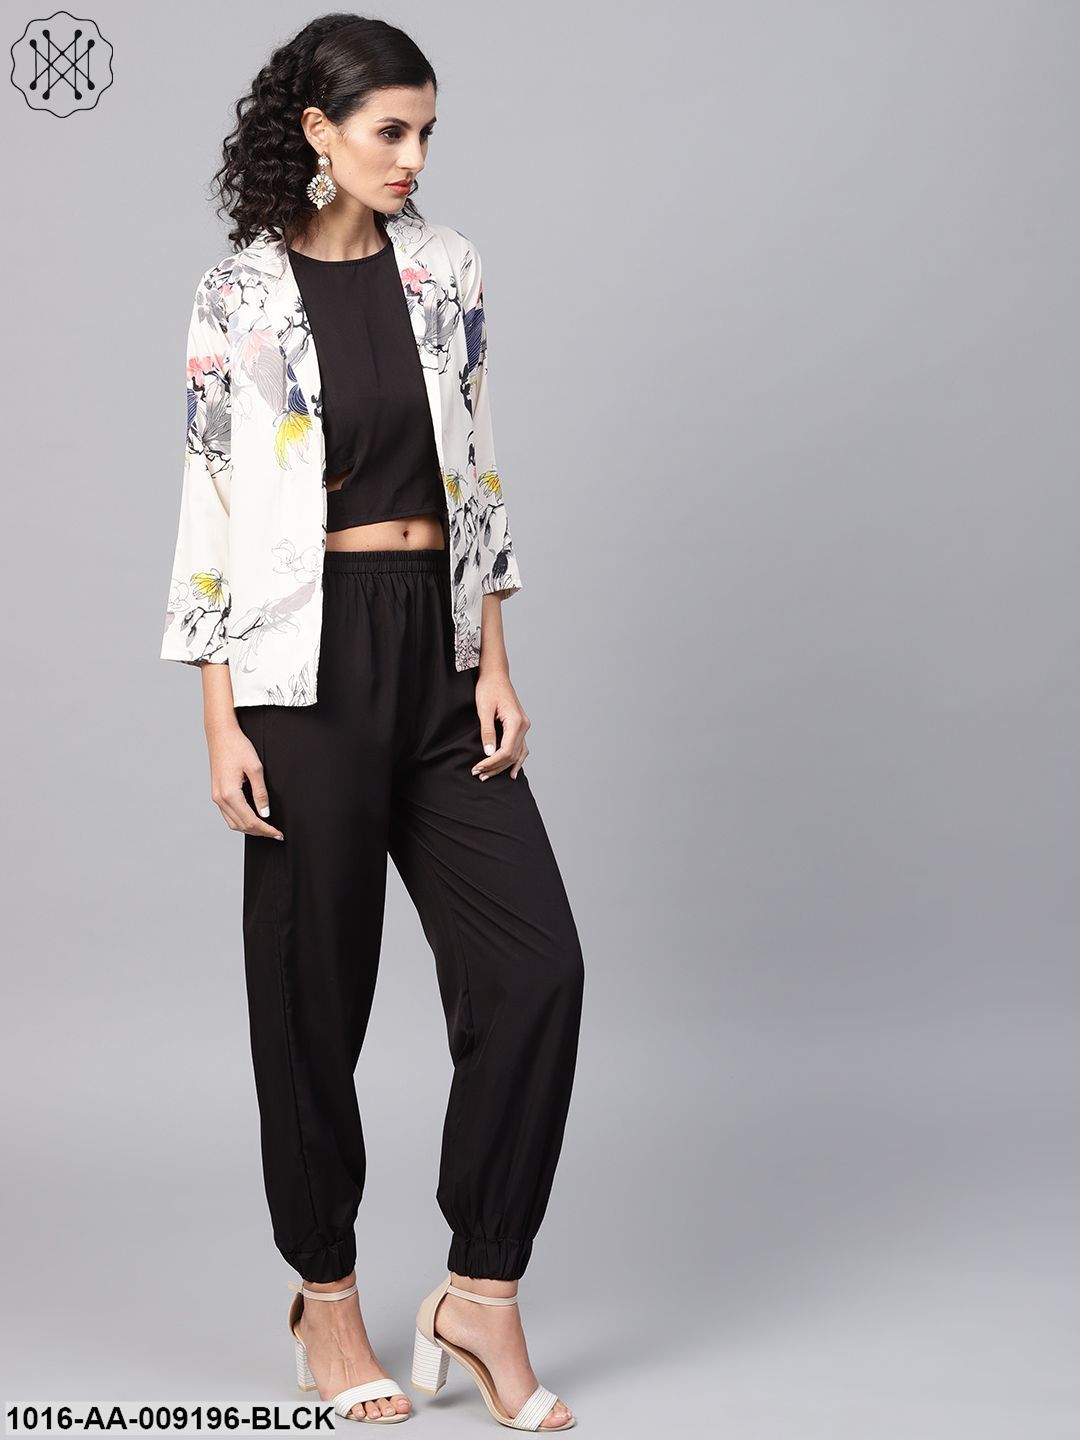 Solid Black Tops And Palazzo With Cream Floral Printed Jacket